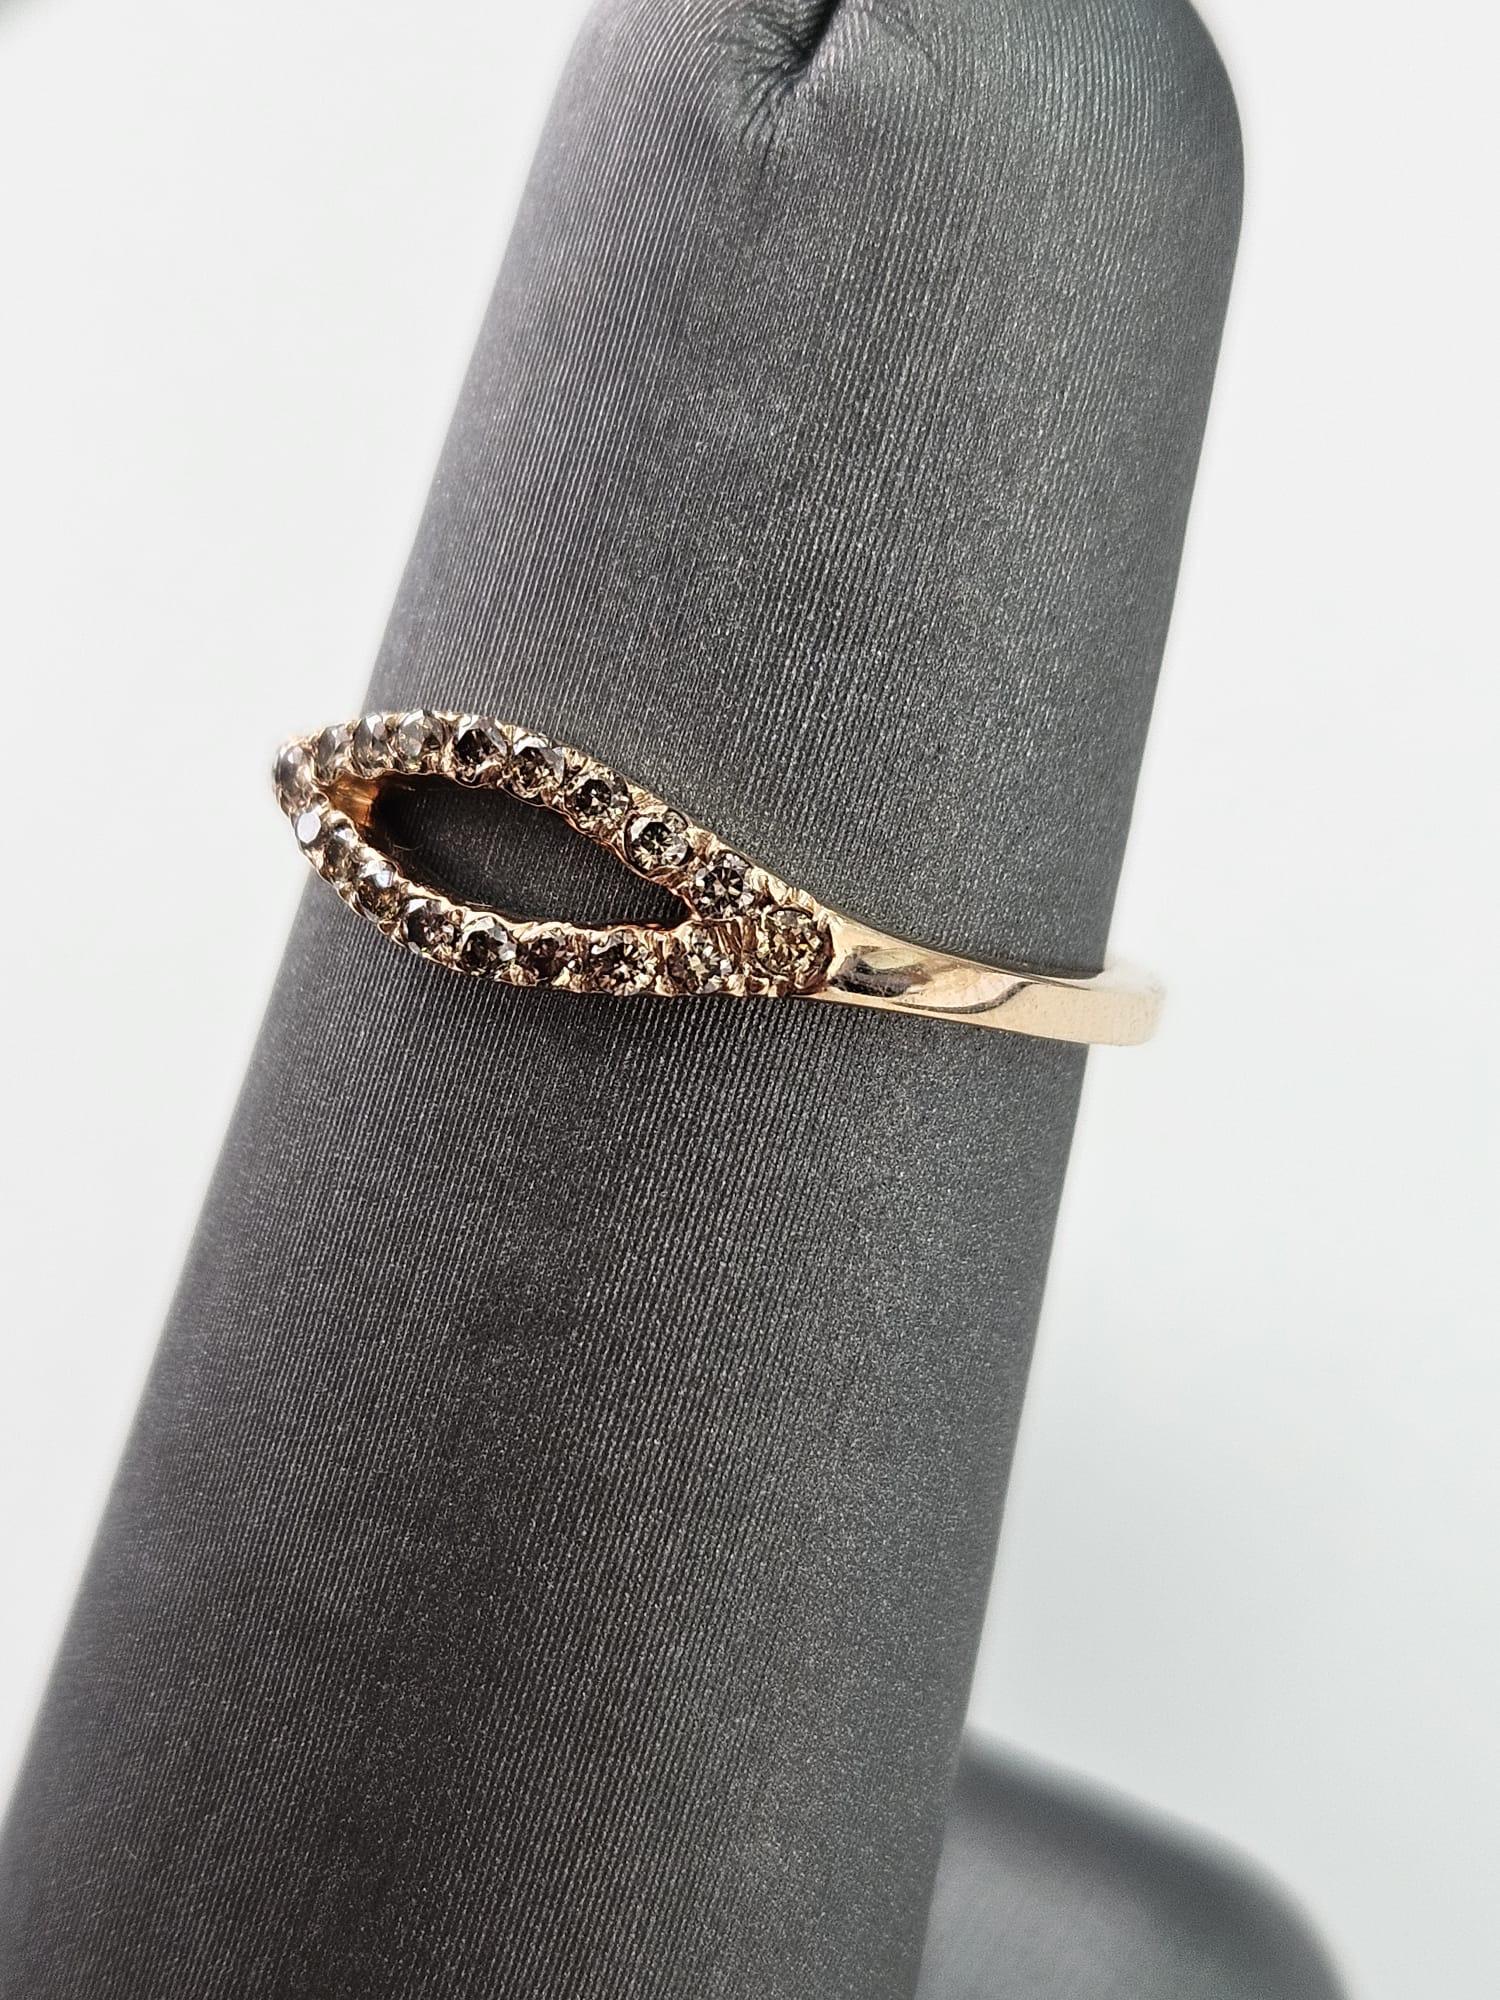 Introducing a mesmerizing and elegant 0.22 carat Brown Diamond oval band ring, meticulously crafted in luxurious rose gold, designed to exude warmth and sophistication. This exquisite ring features shimmering Brown Diamonds, totaling 0.22 carats,